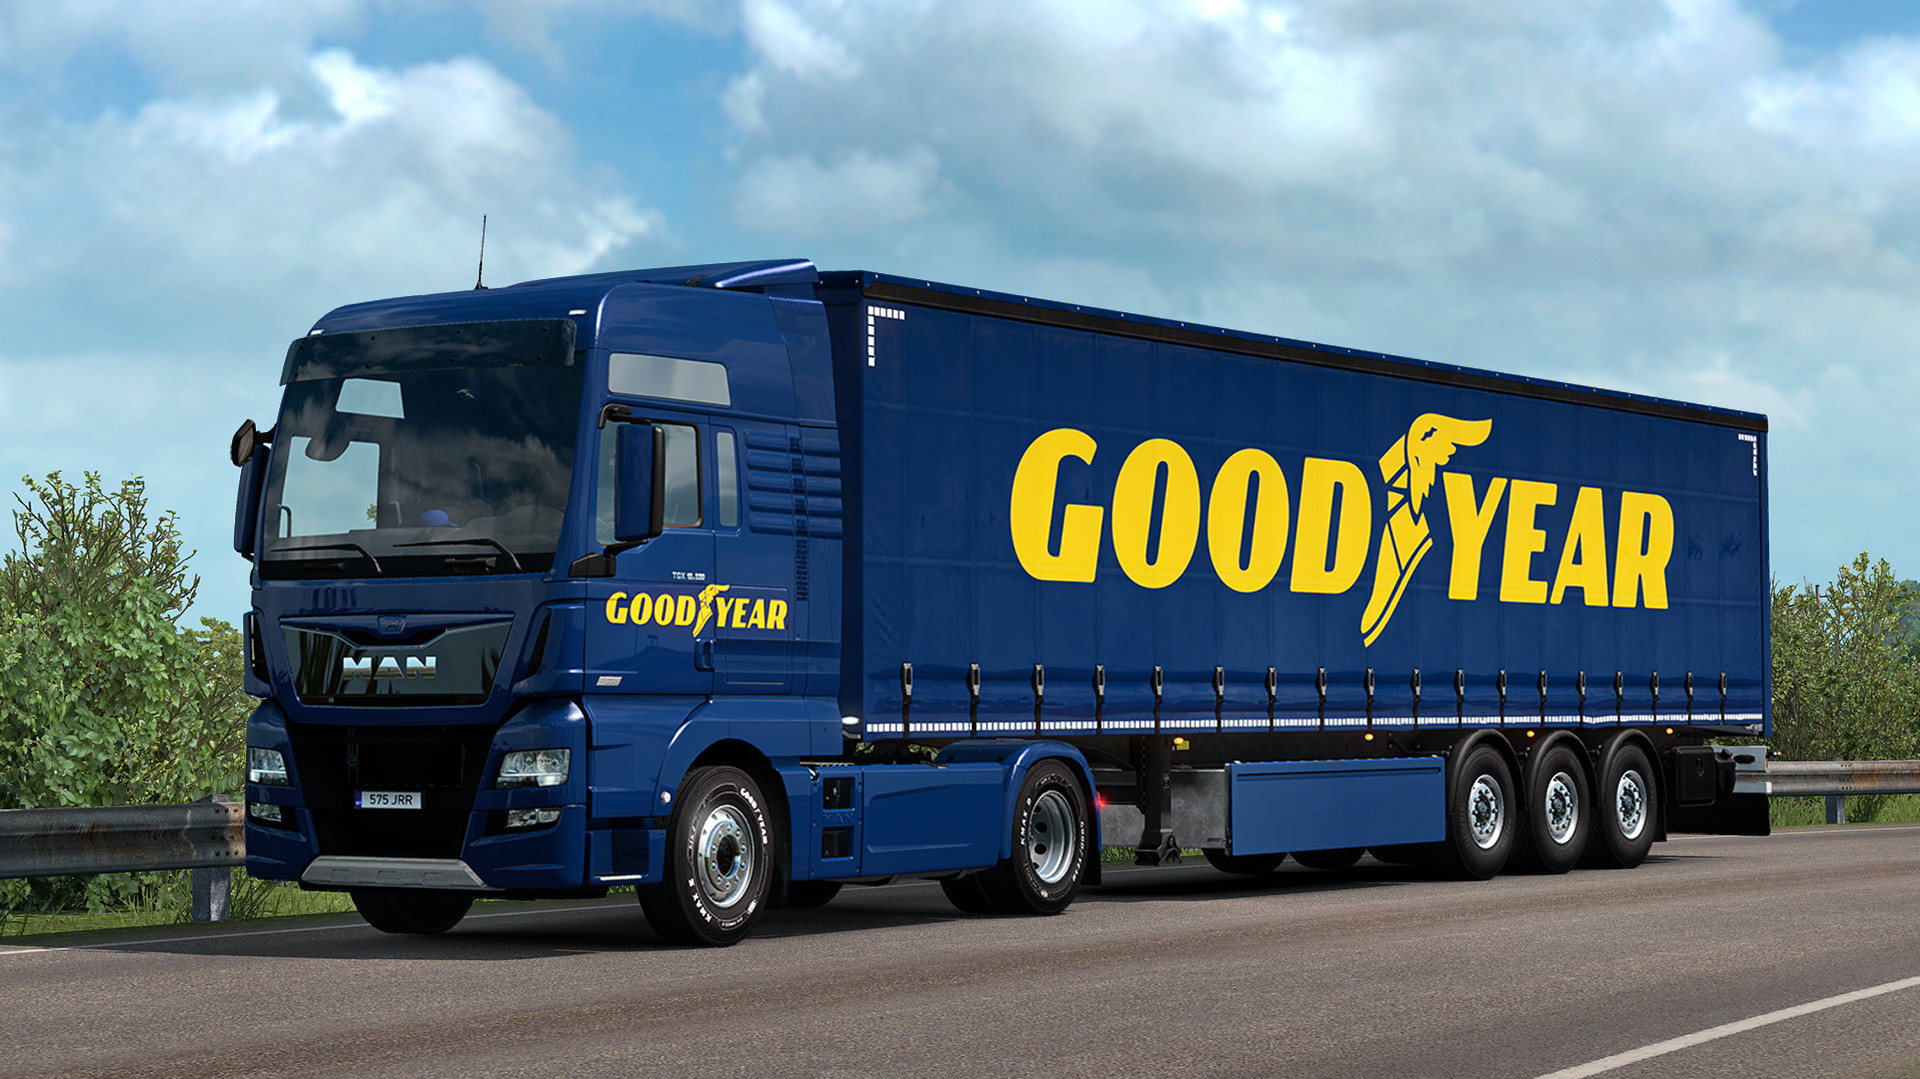 Save 50% on Euro Truck Simulator 2 - Goodyear Tyres Pack on Steam